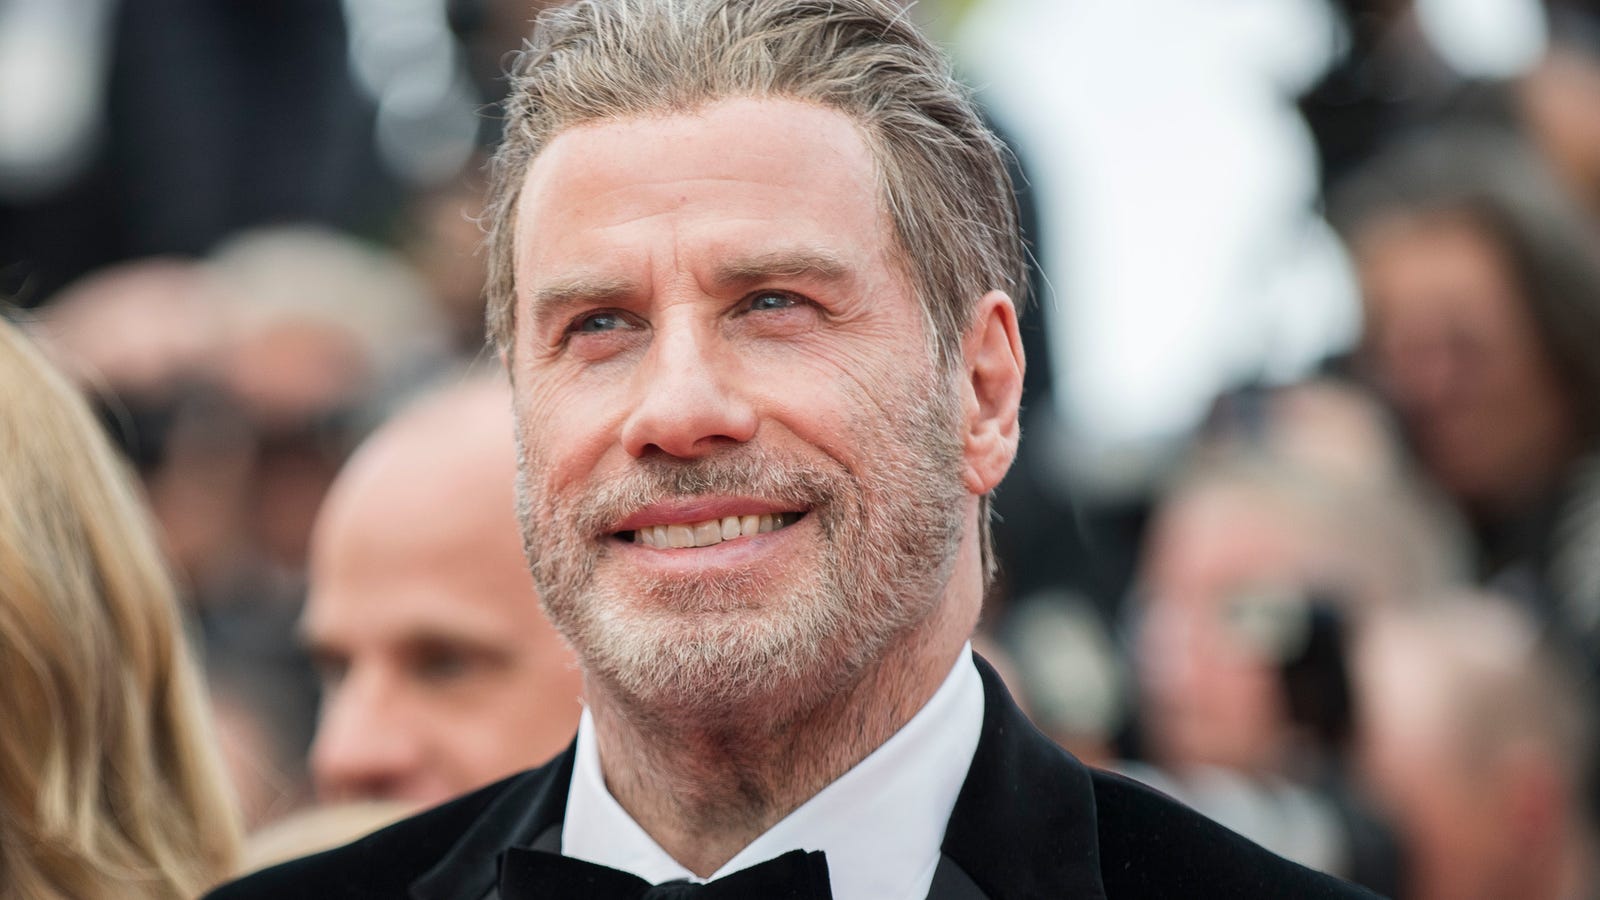 John Travolta Doesn't Think Much About the #MeToo Movement